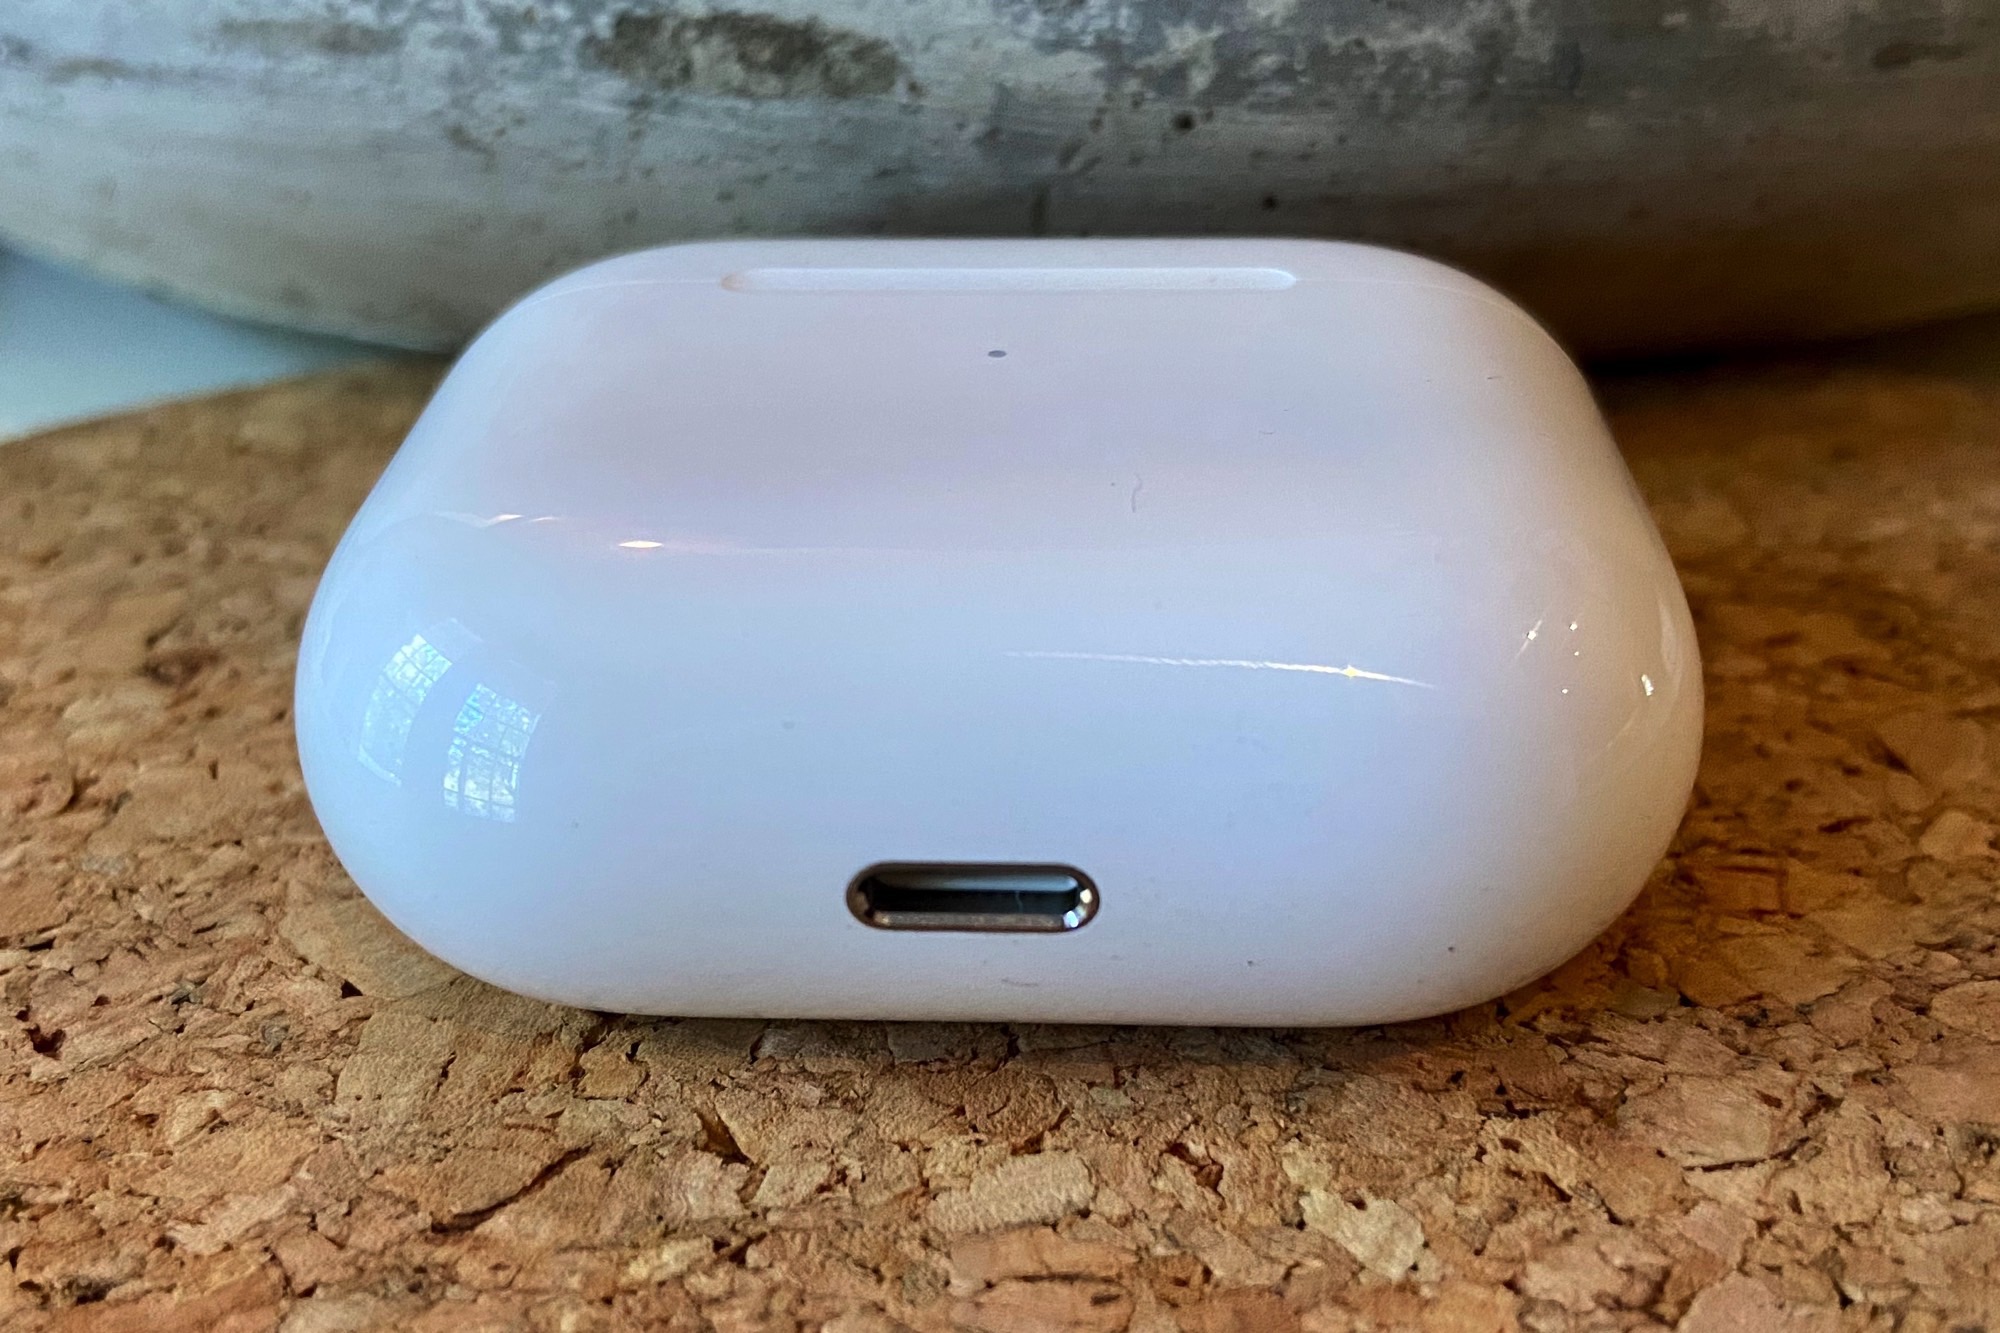 Apple AirPods 3 Review: Better Buds In Every Way